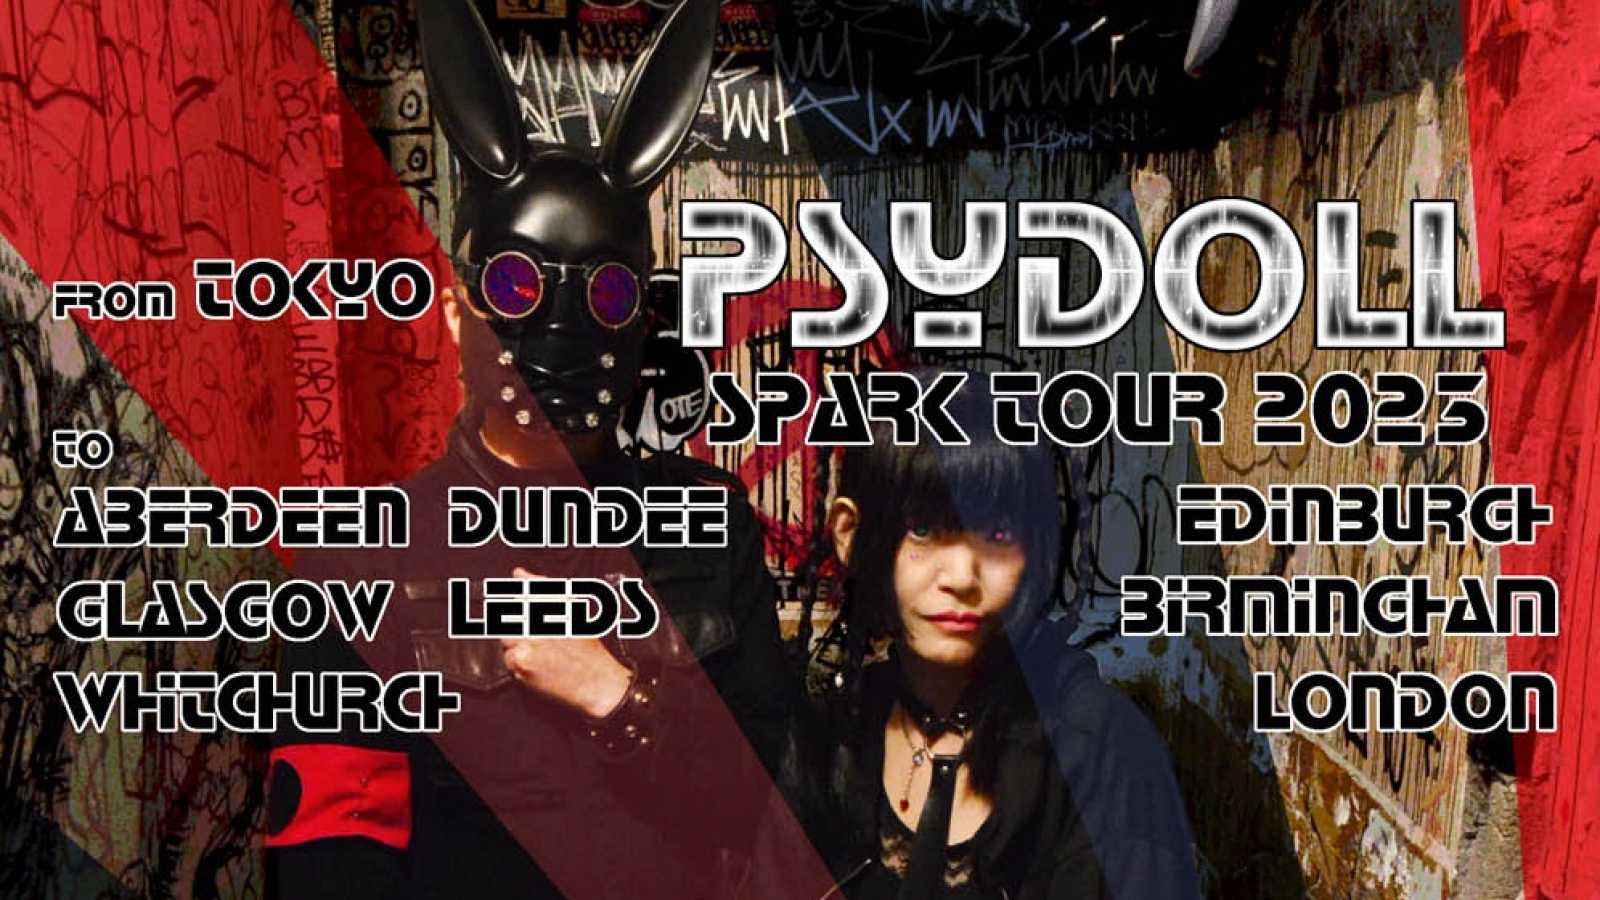 PSYDOLL Announce UK Tour © PSYDOLL. All rights reserved.